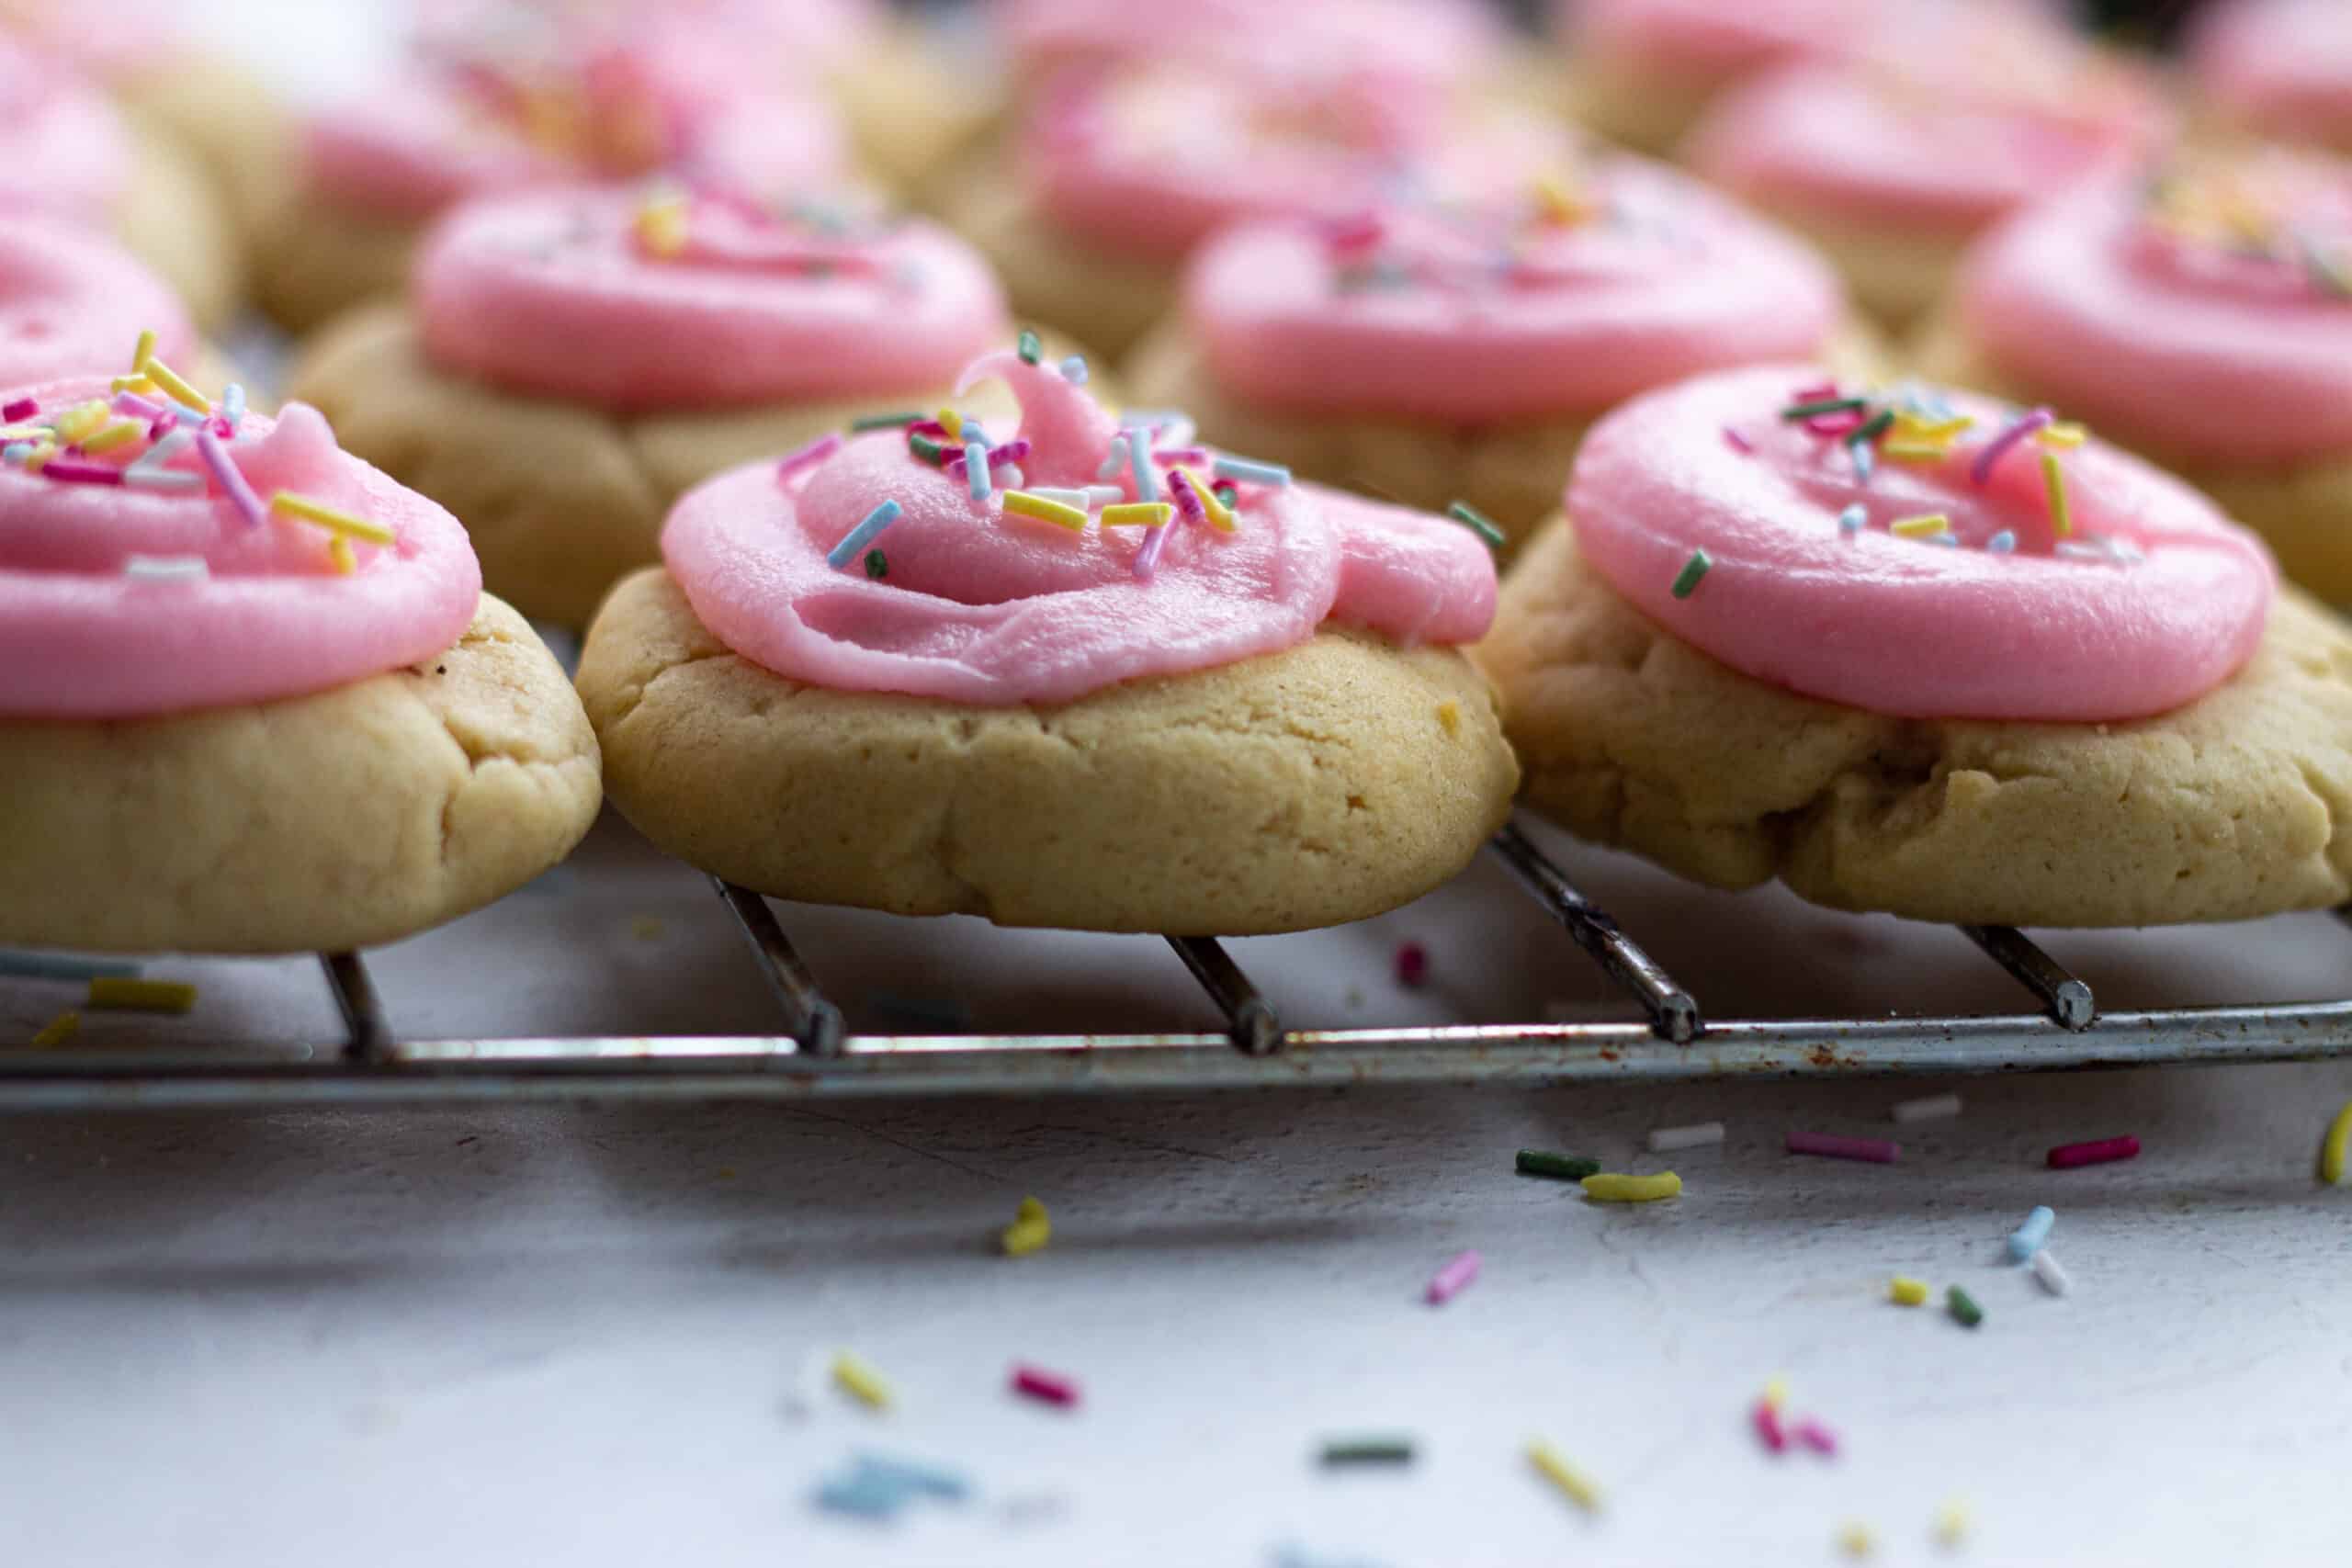 A tray of pink iced cookies